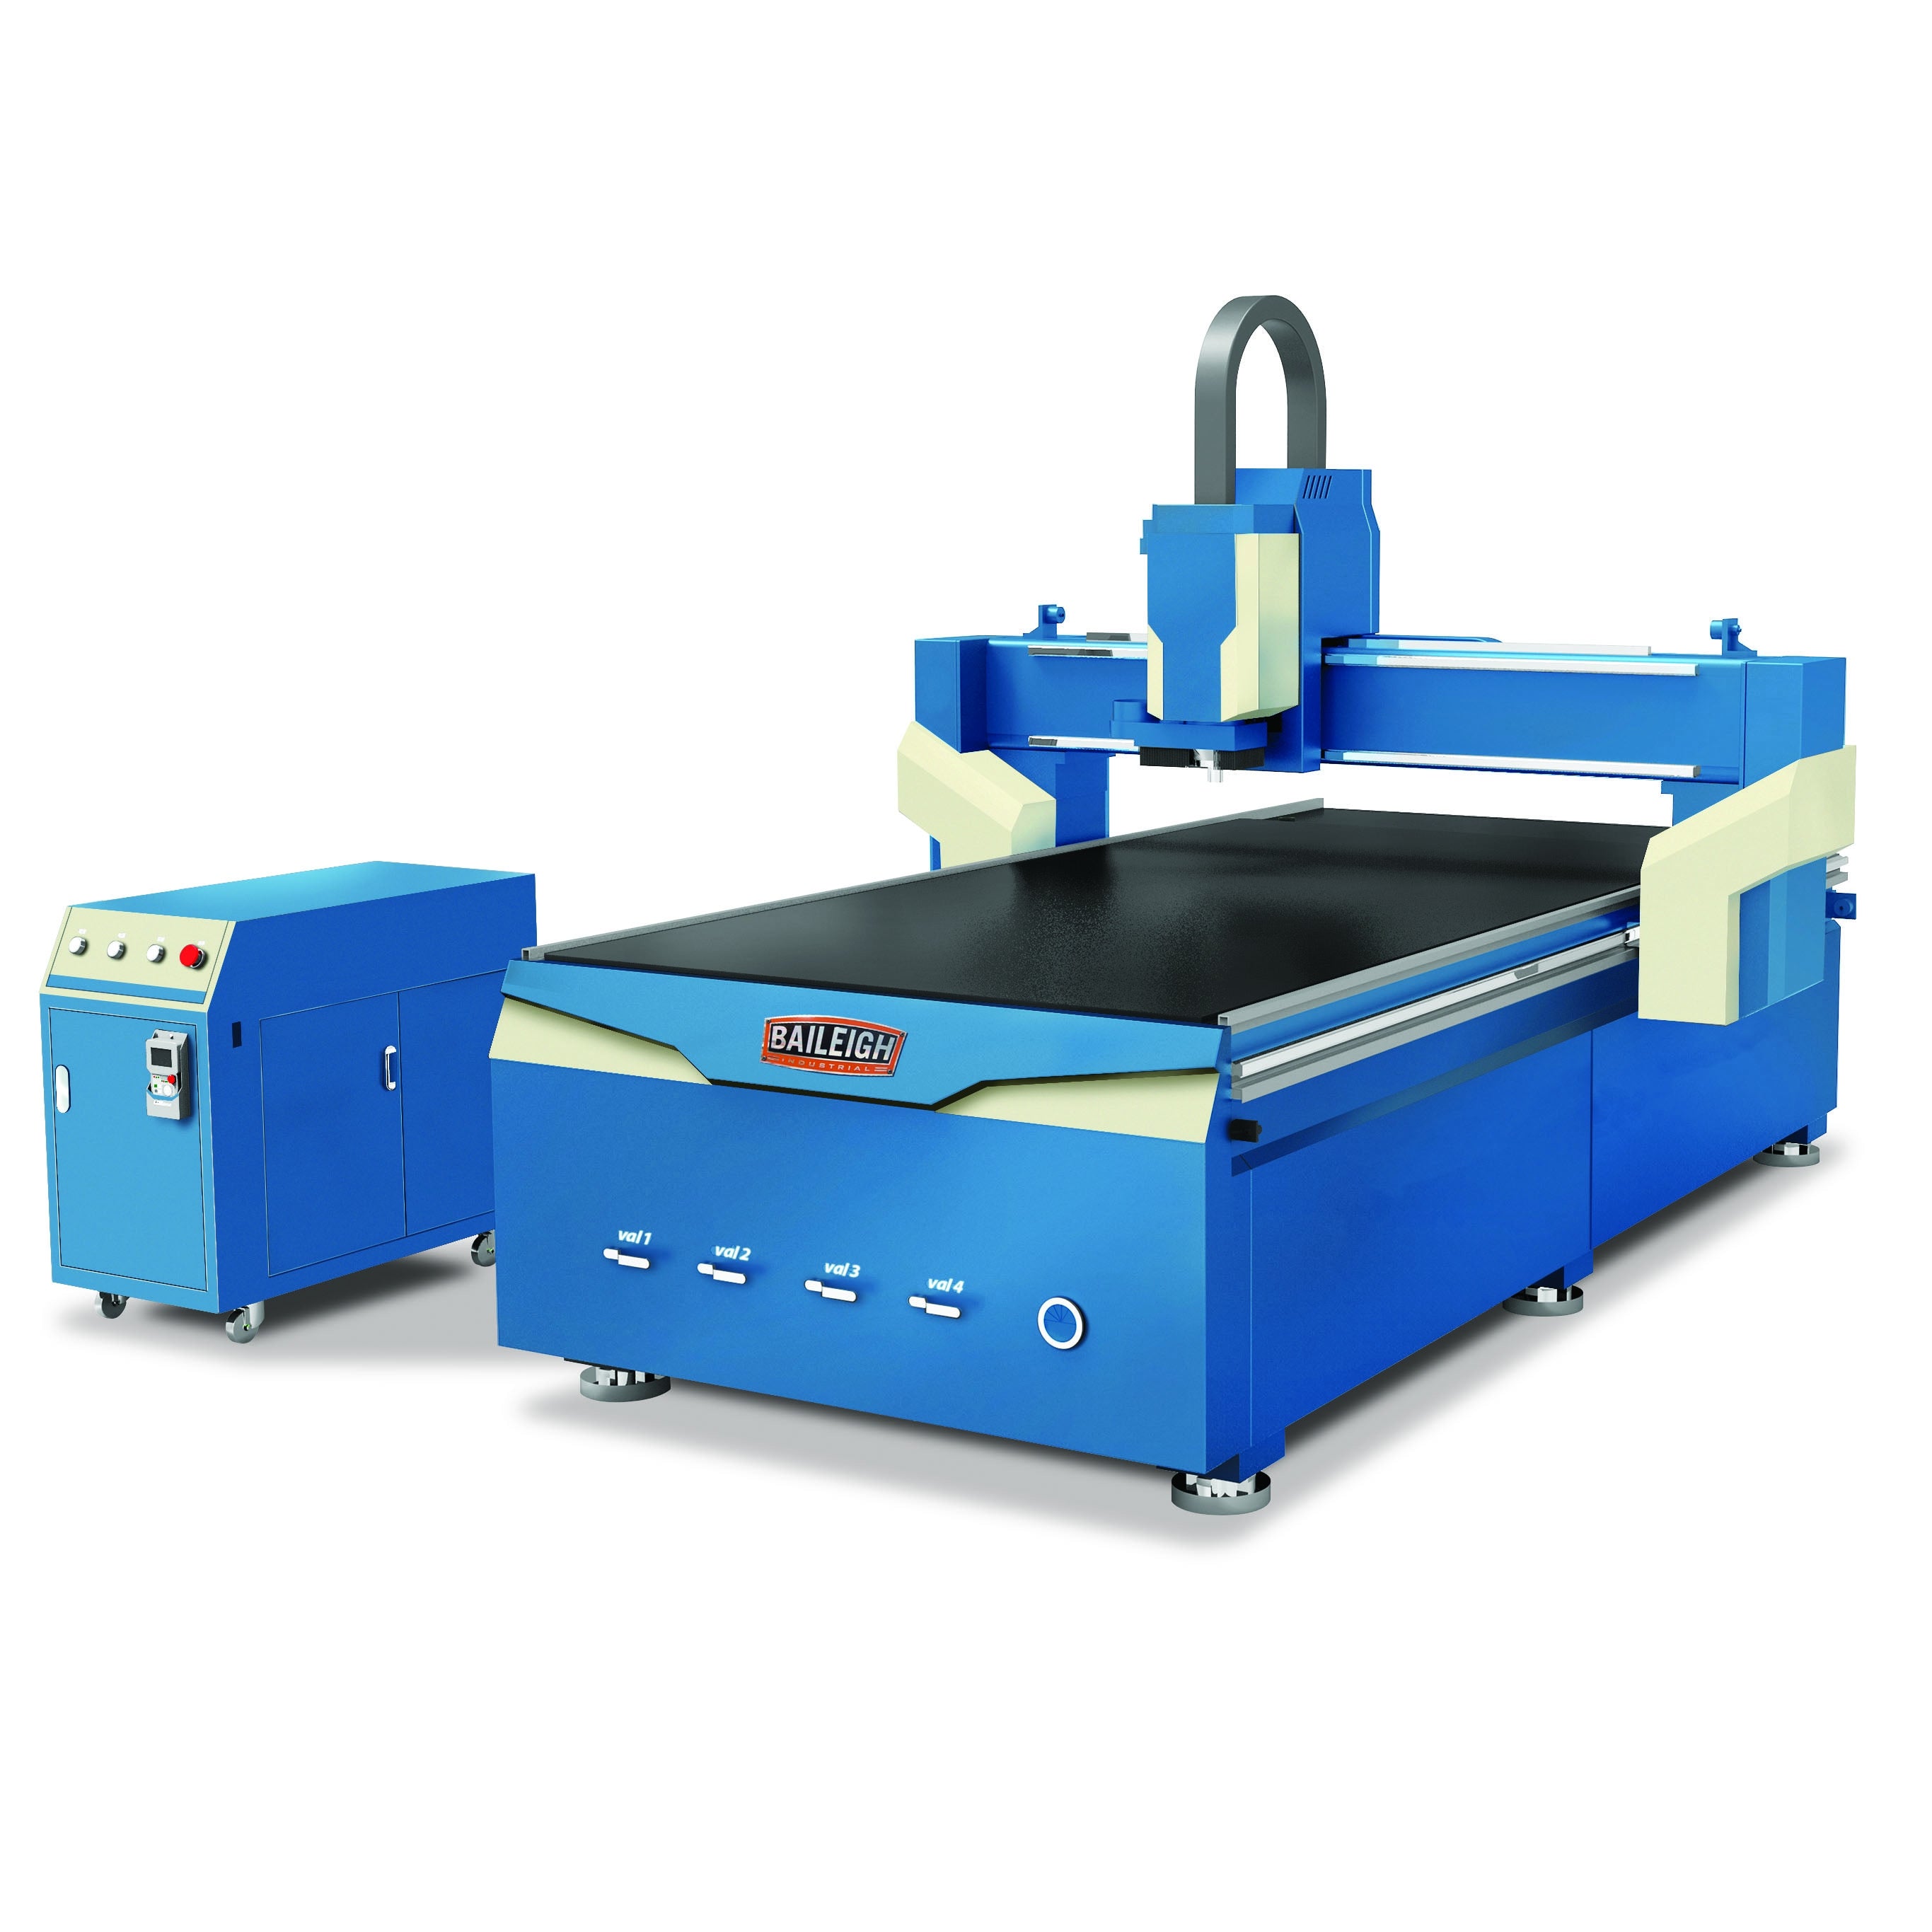 Baileigh WR-105V-ATC 220V 3 5'x10' CNC Router Table, Vacuum Table, 12HP HSD Spindle, 6pc ATC, and Software Package